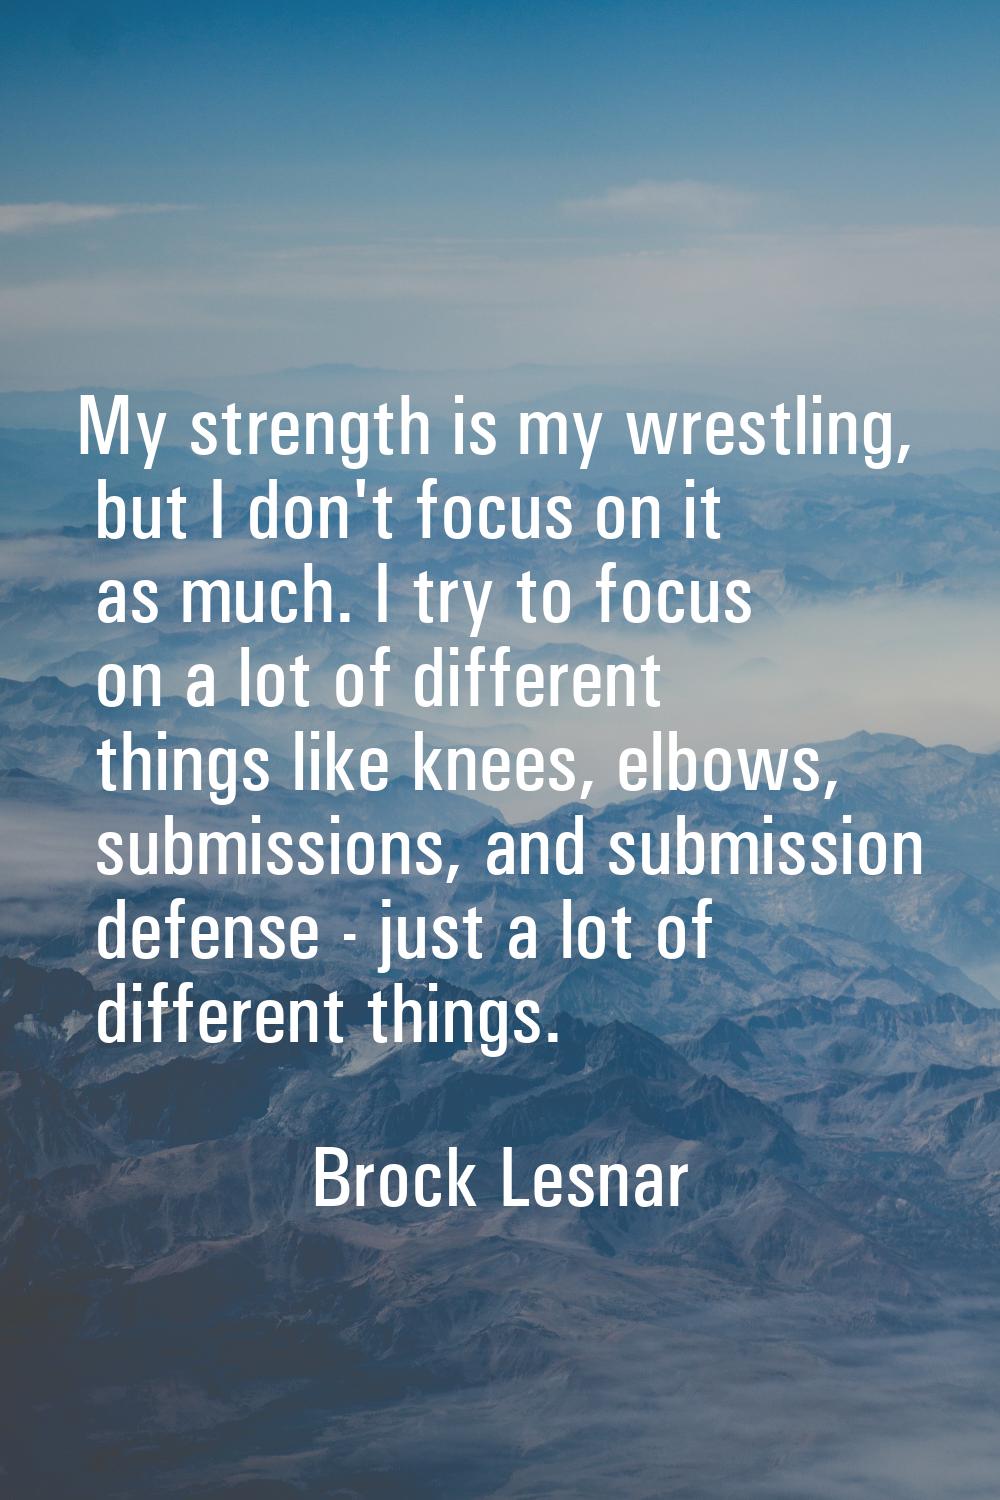 My strength is my wrestling, but I don't focus on it as much. I try to focus on a lot of different 